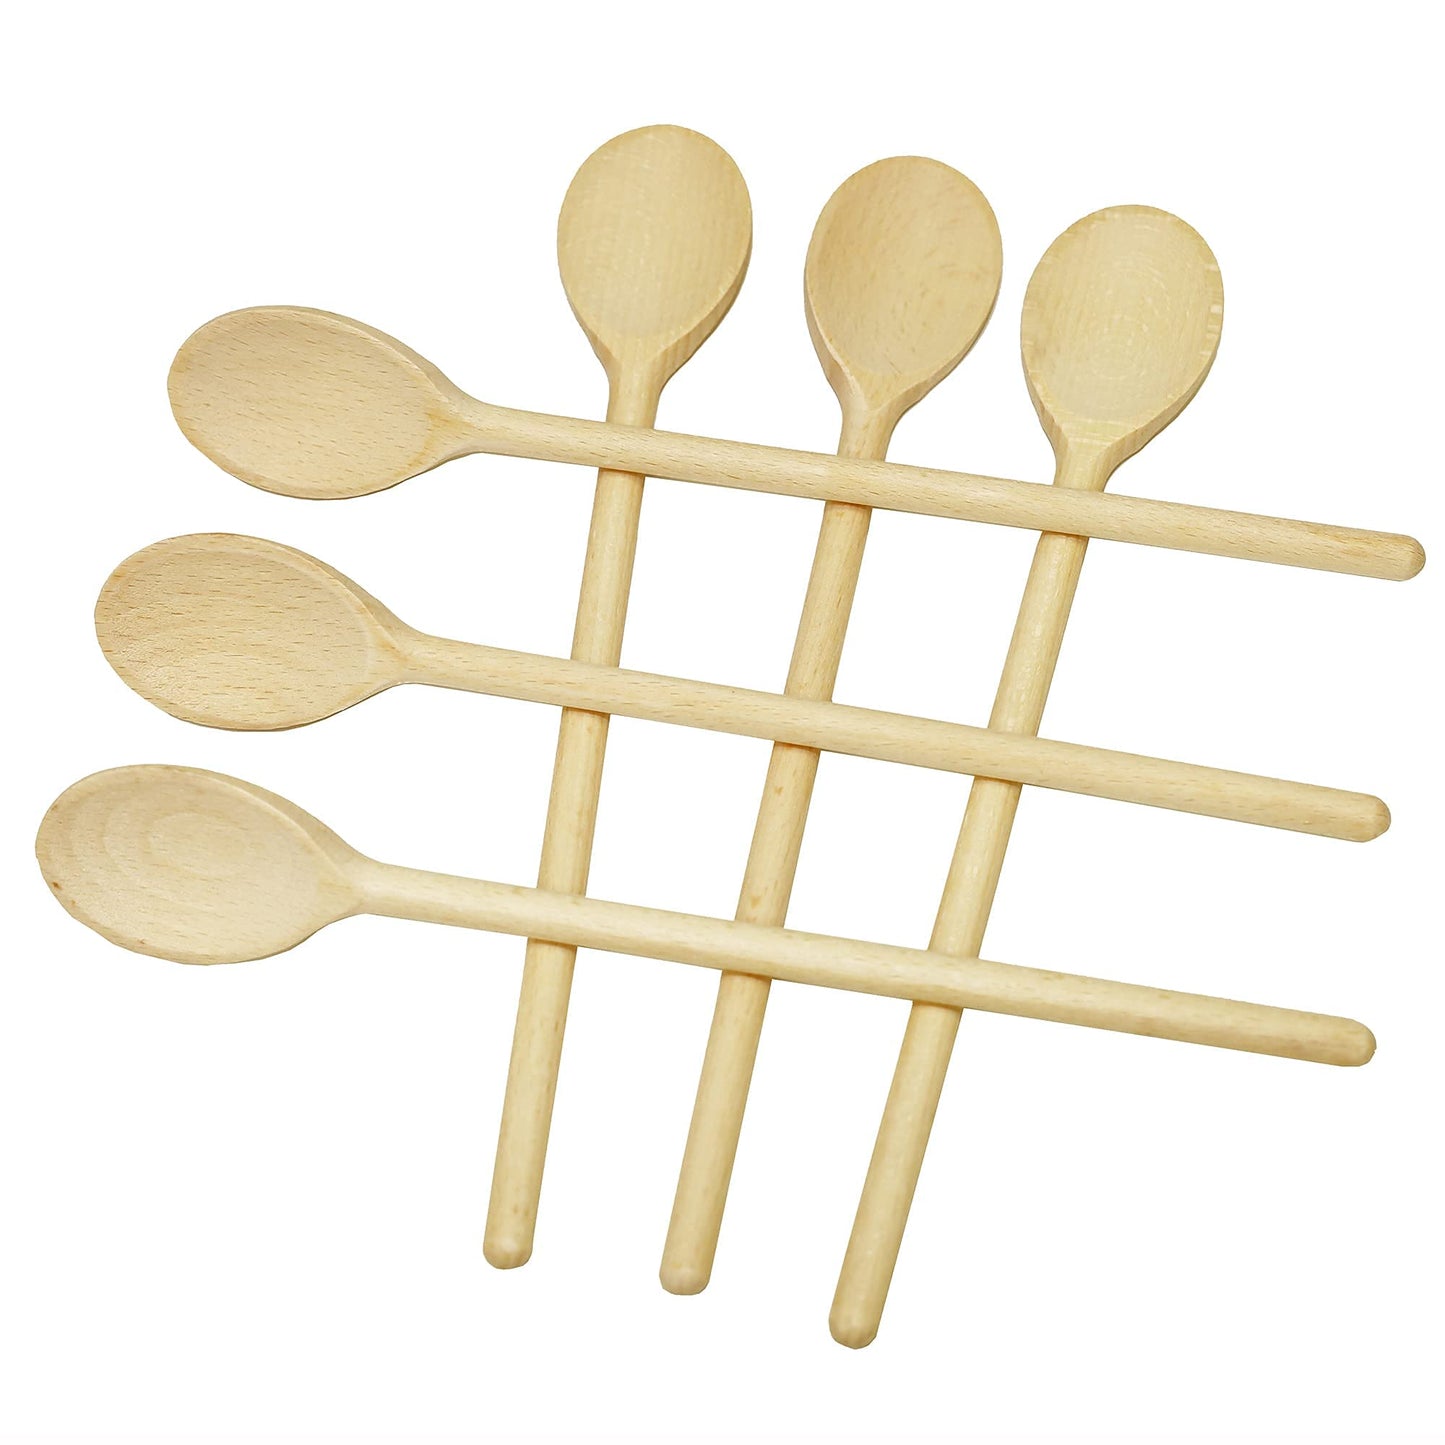 BICB Oval Wooden Spoons for Cooking, Pack of 6 (12-Inch Long) Solid Natural Beechwood Cookware for Stirring, Mixing, Tasting, Serving Food, Craft,